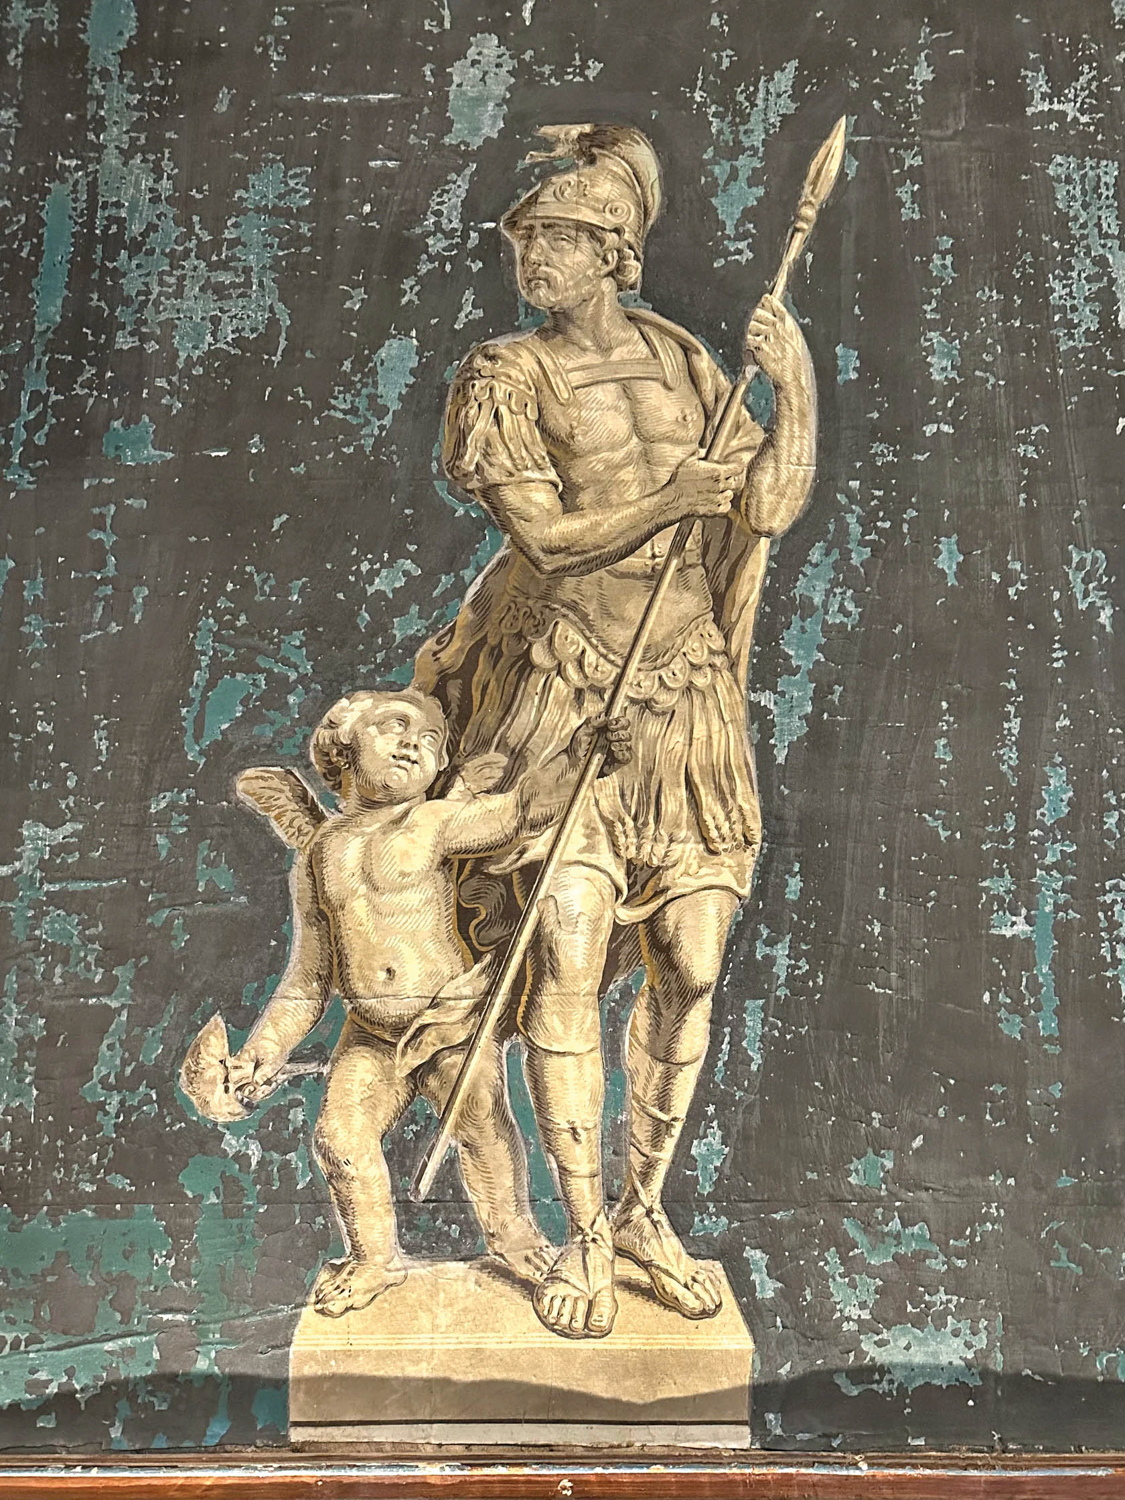 Artwork by Cindy Smith depicting stone sculpture of a cherub grabbing an ancient soldier’s spear